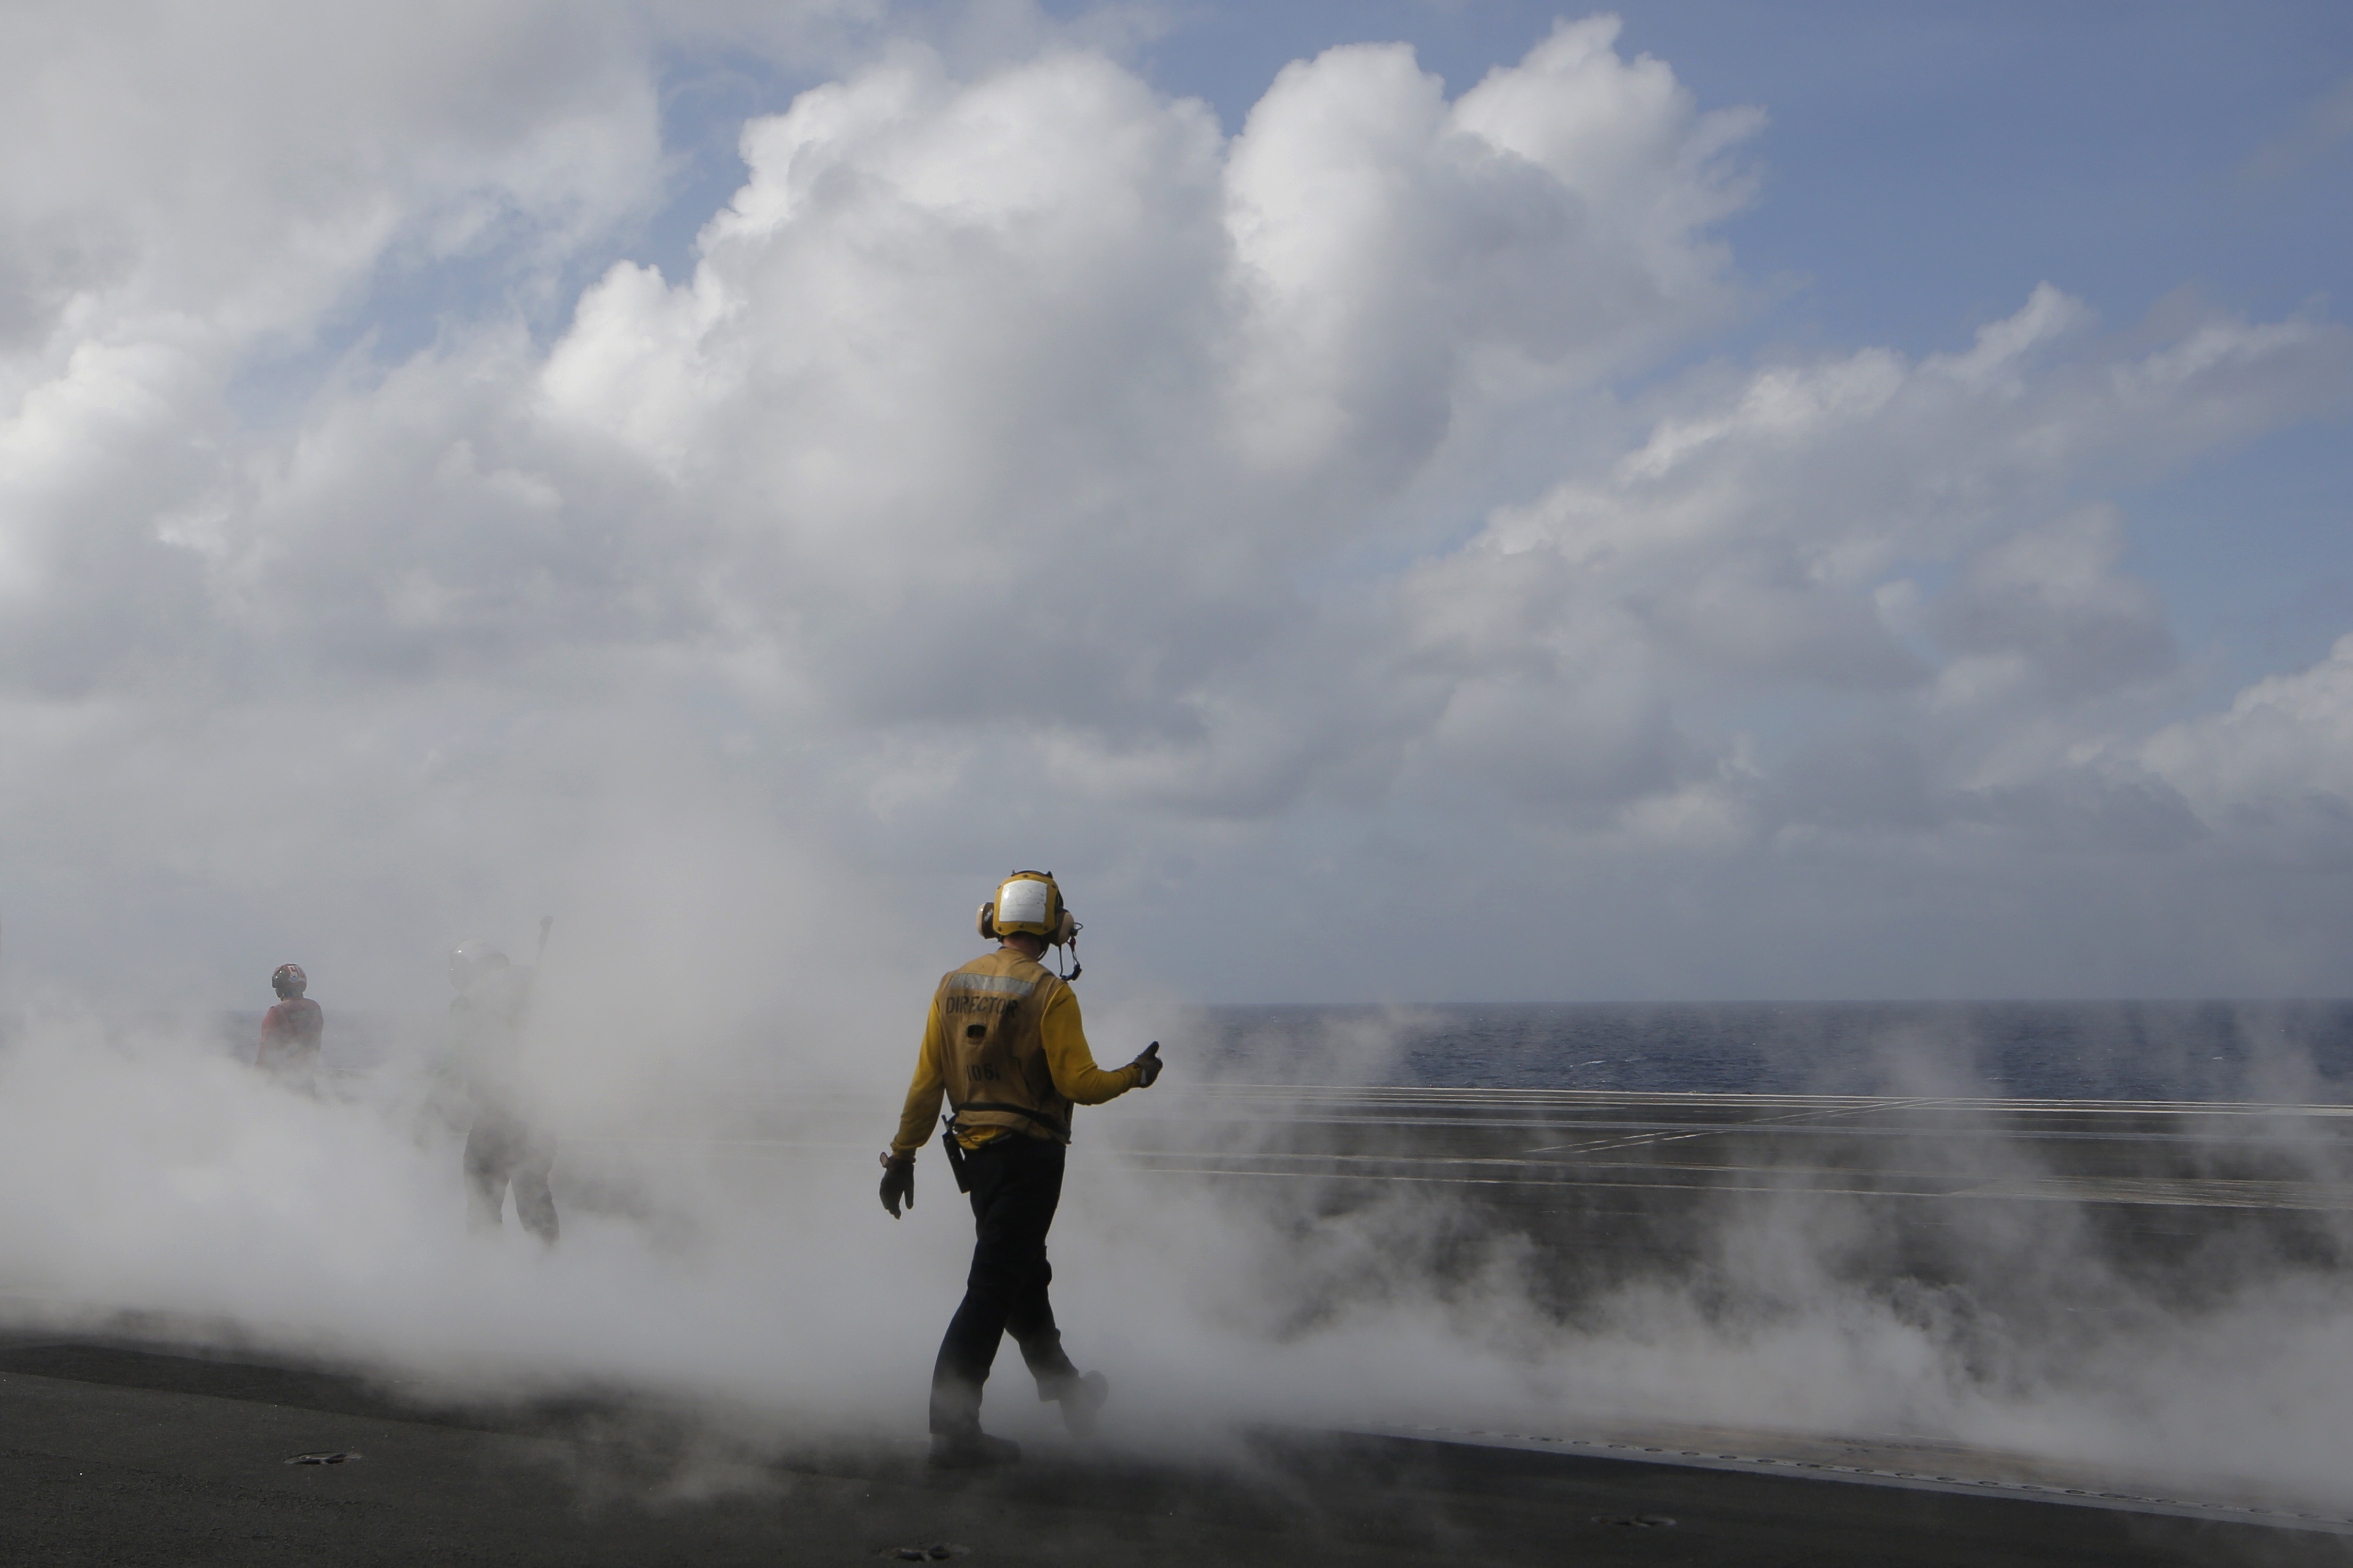 A crew member walks across the deck of the U.S. Navy USS Ronald Reagan in the South China Sea, Tuesday, Nov. 20, 2018. China is allowing a U.S. Navy aircraft carrier and its battle group to make a port call in Hong Kong after it turned down similar request amid tensions with Washington. (AP Photo/Kin Cheung)